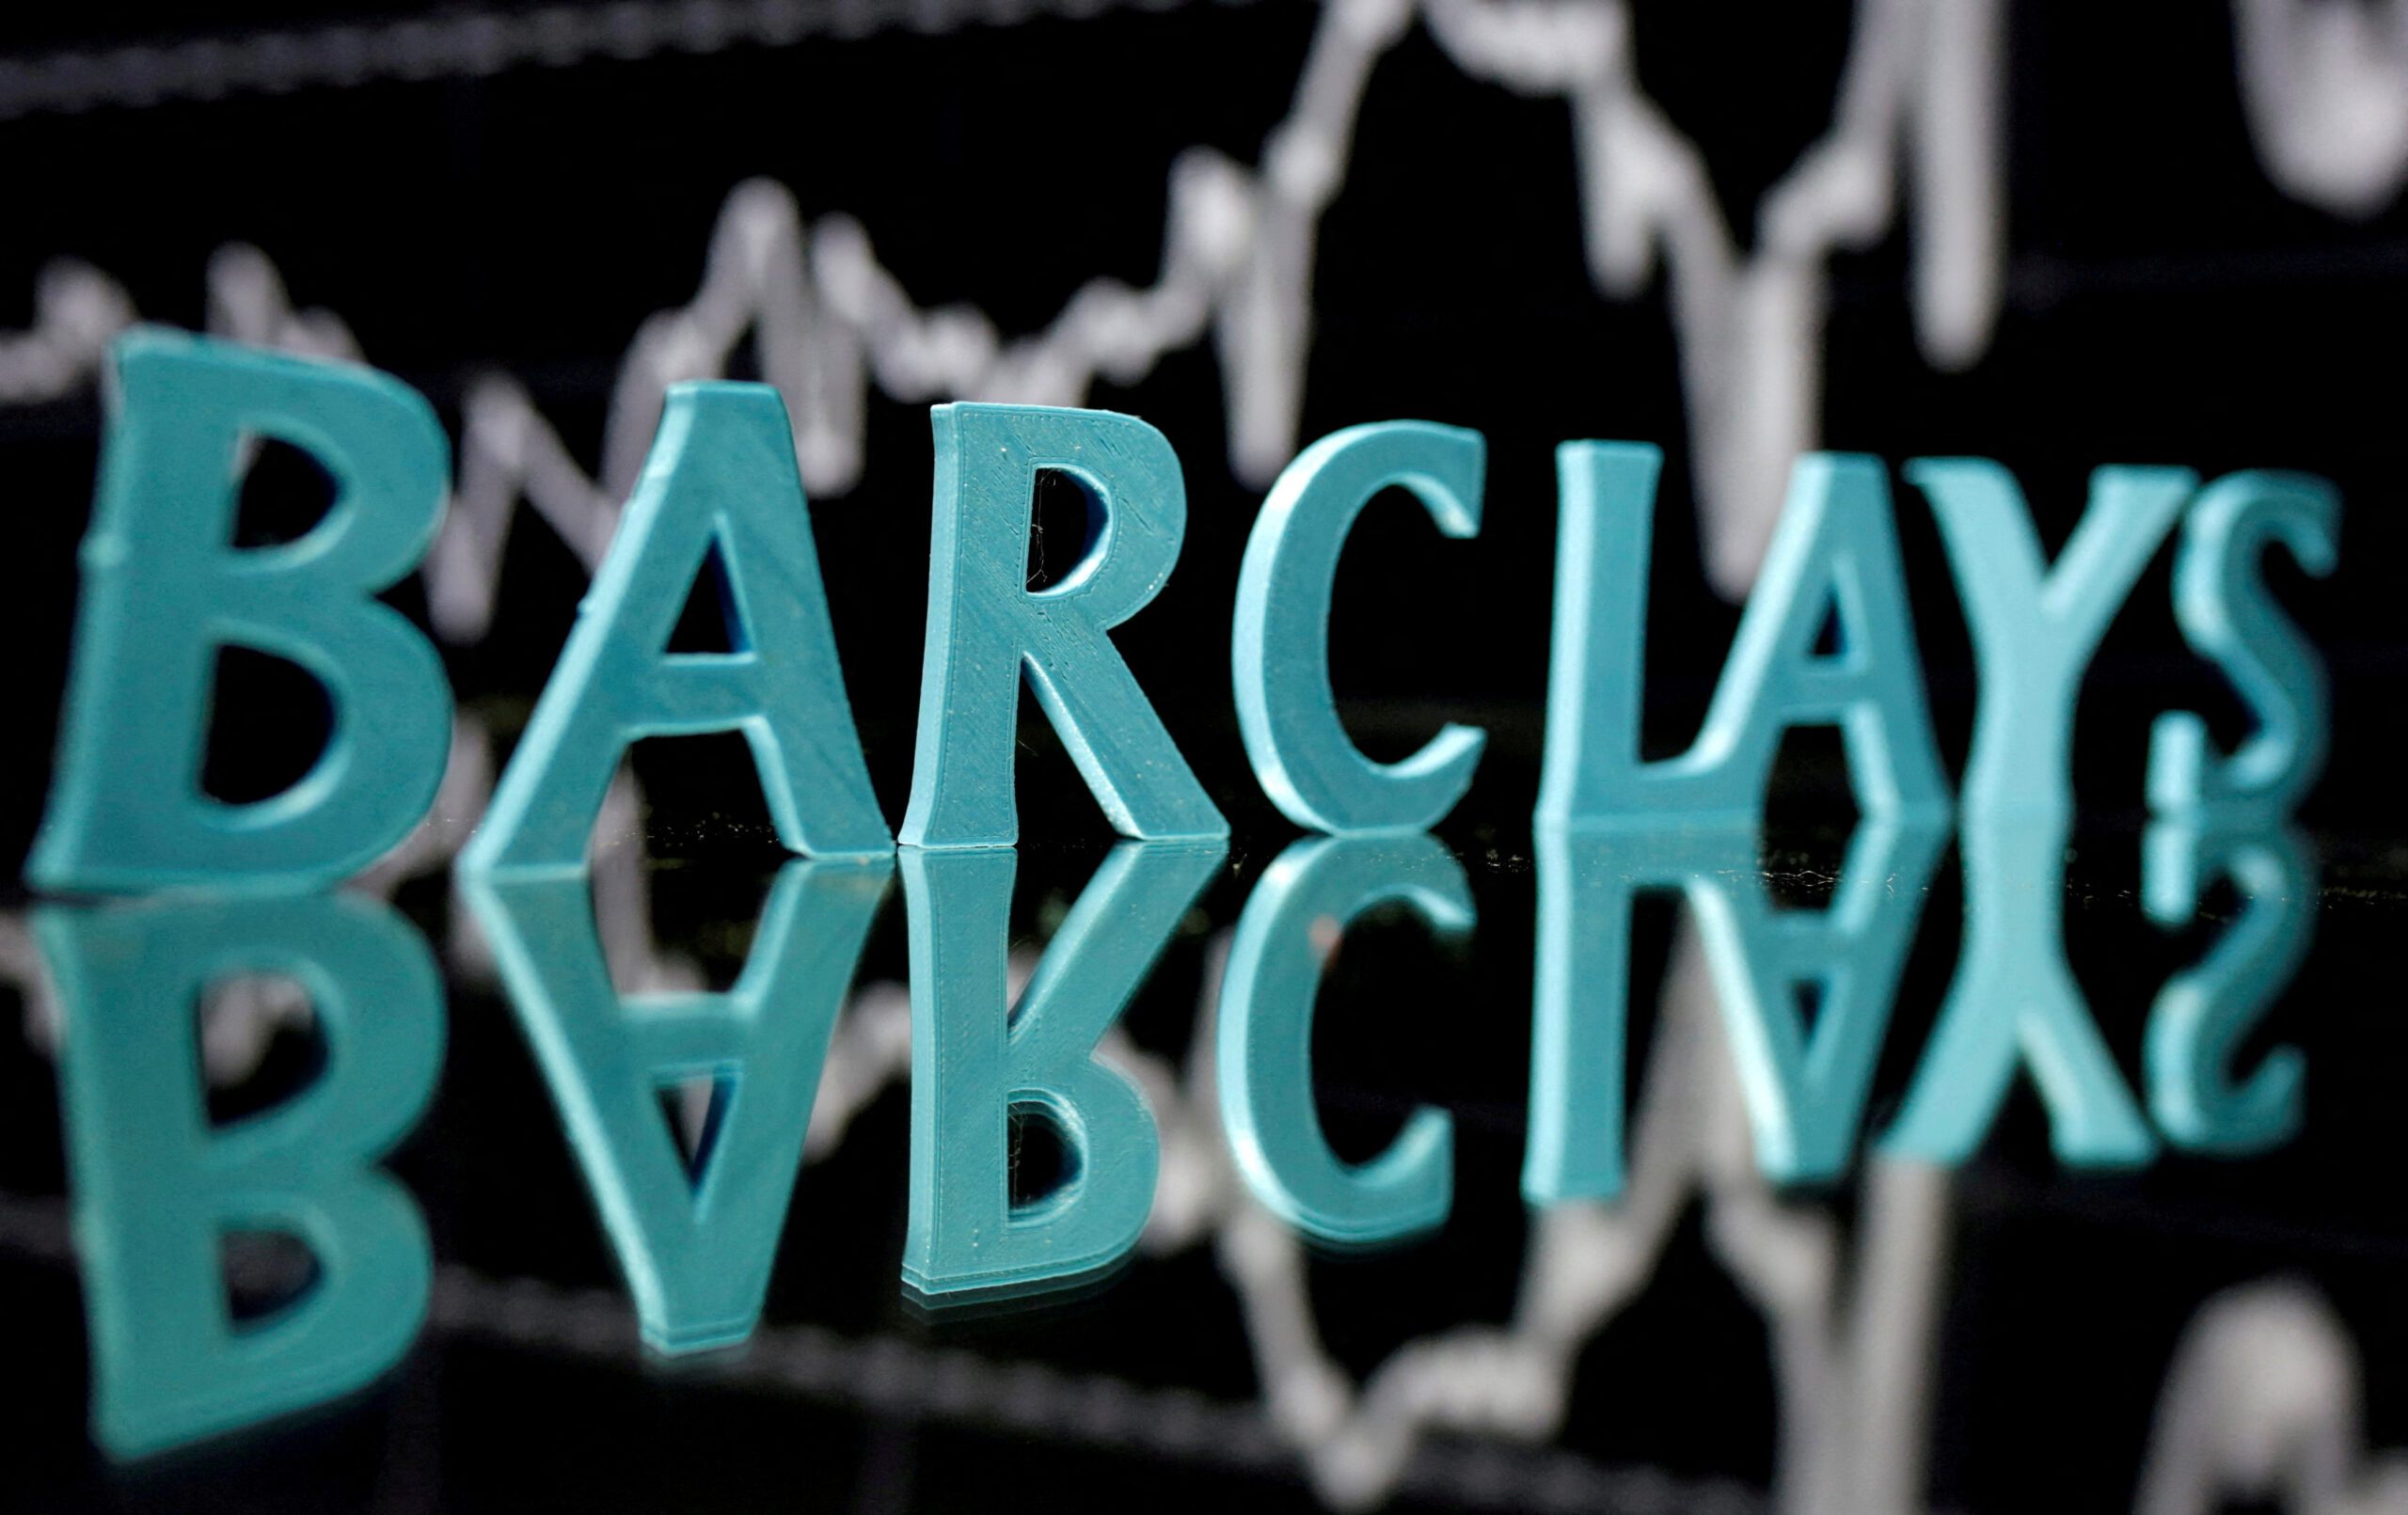 Barclays to cut dozens of US consumer banking jobs